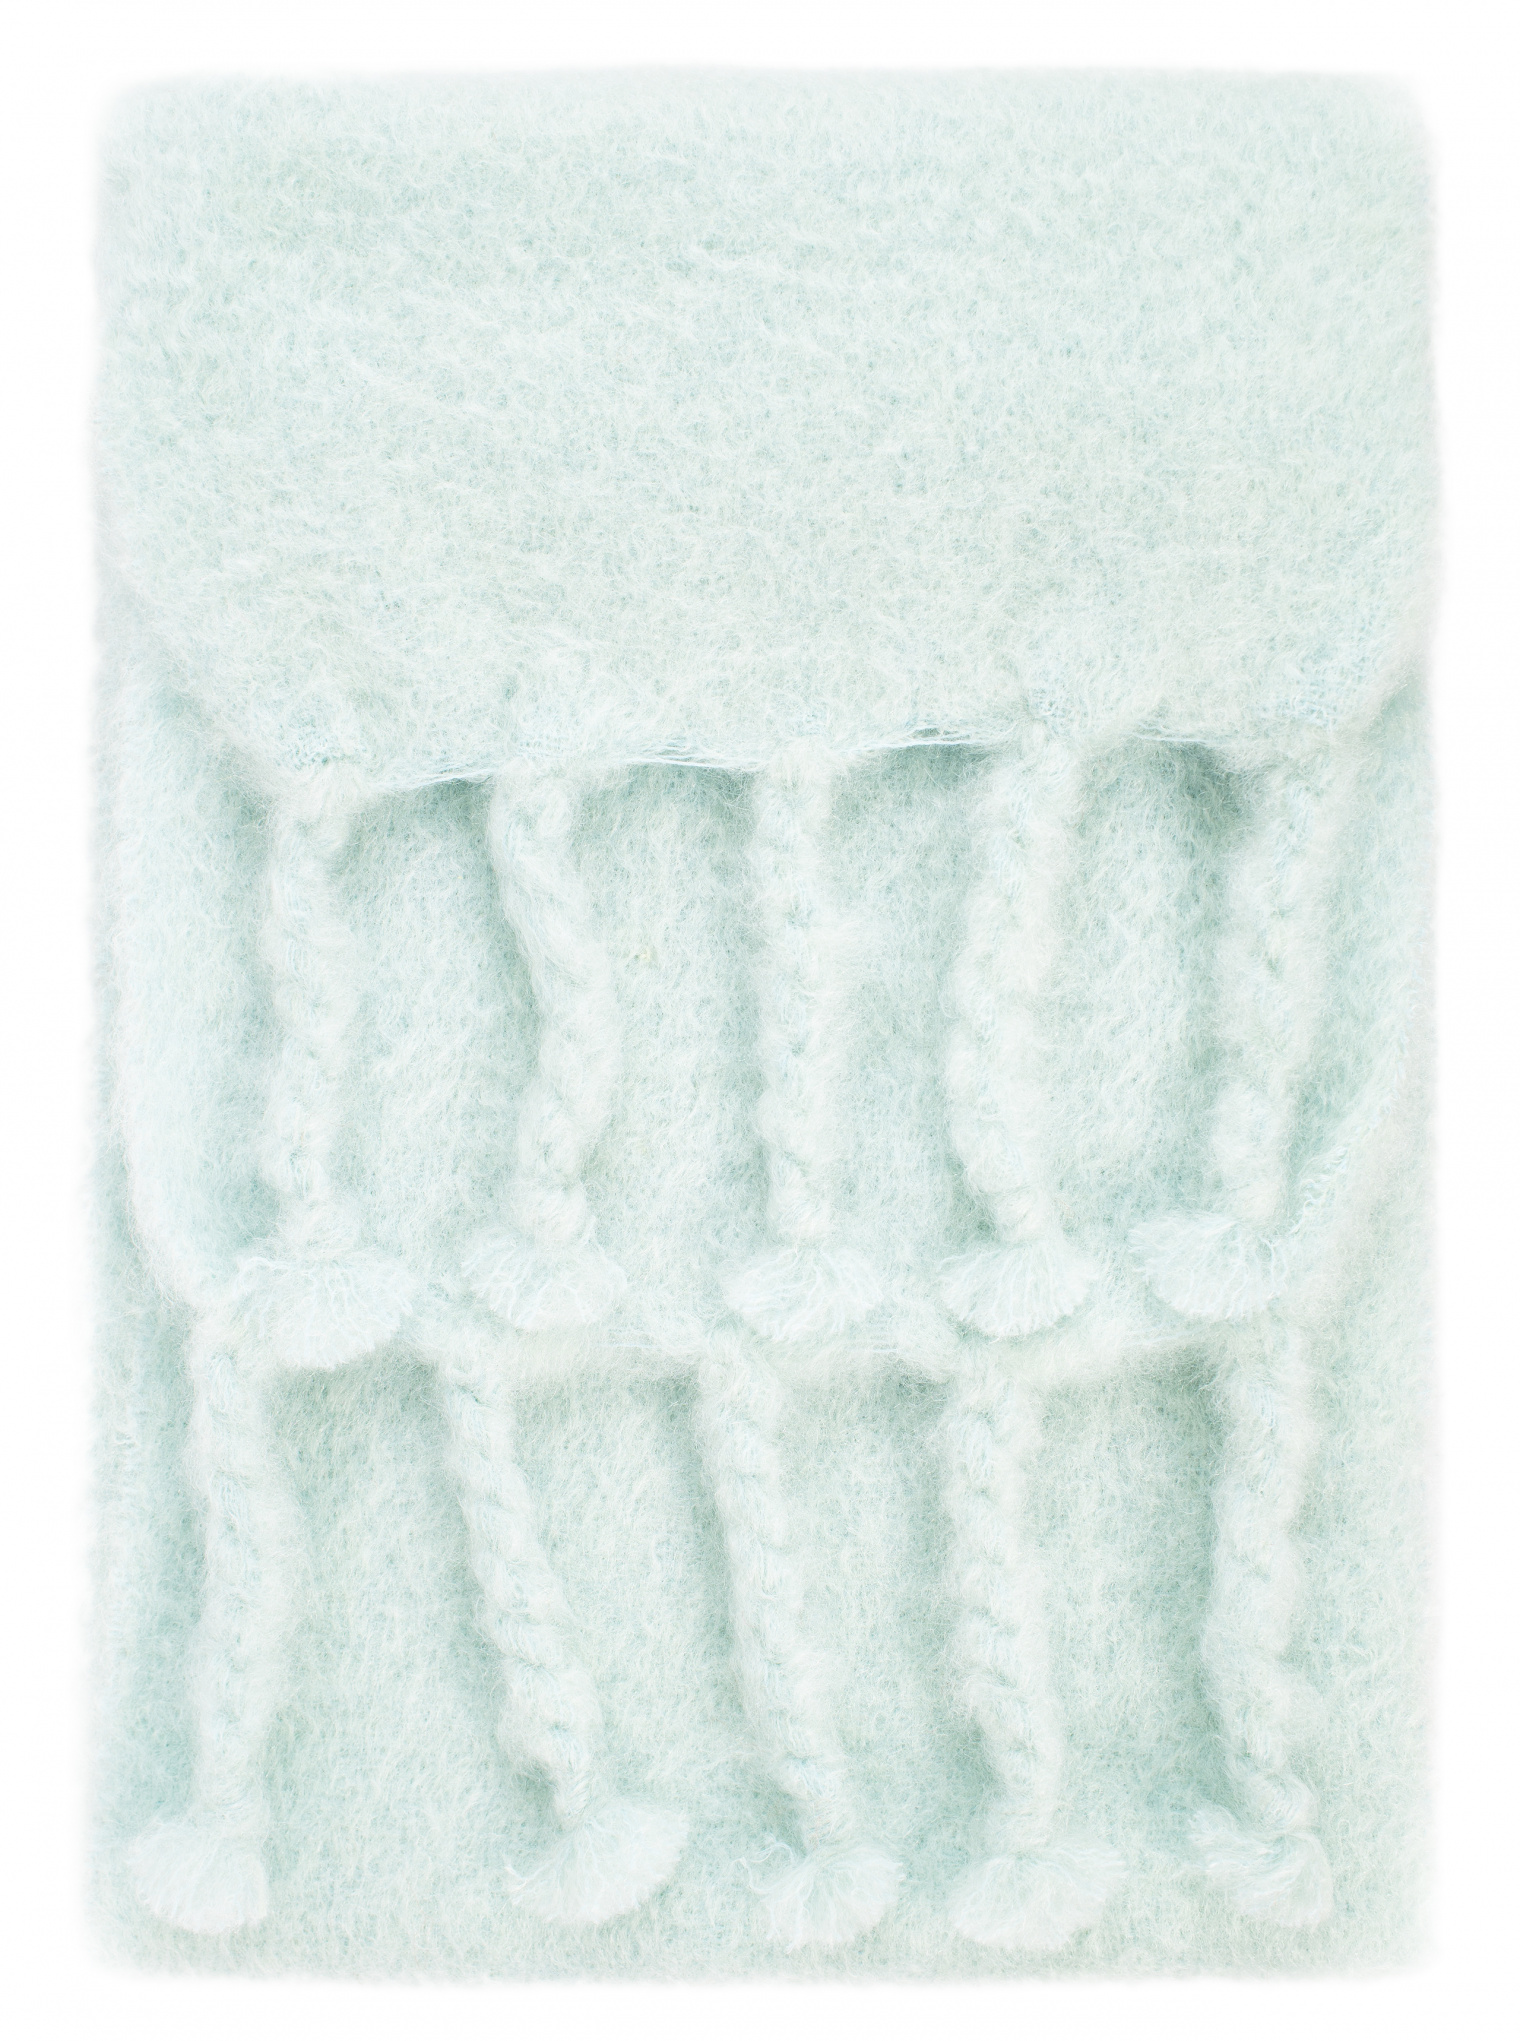 Jil Sander Wool and mohair scarf with fringe